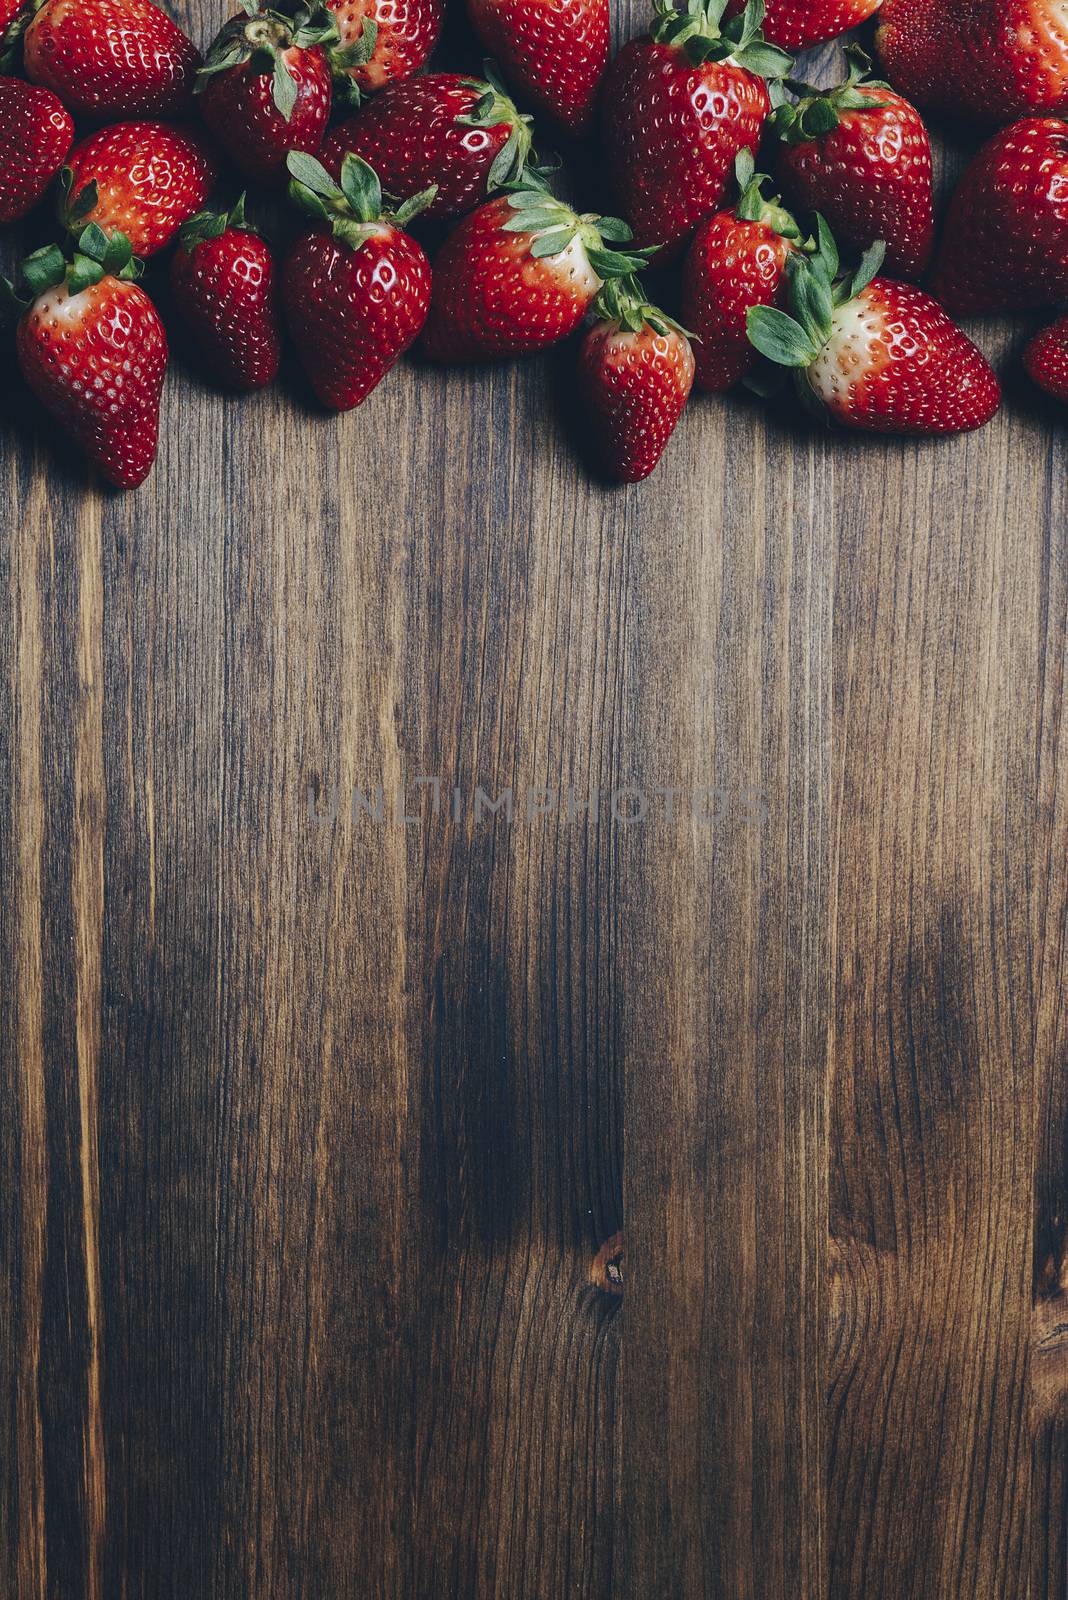 Fresh and juicy strawberries on wooden background in rustic style, healthy sweet food, vitamins and fruity concept. Vertical photo, top view, copy space for text